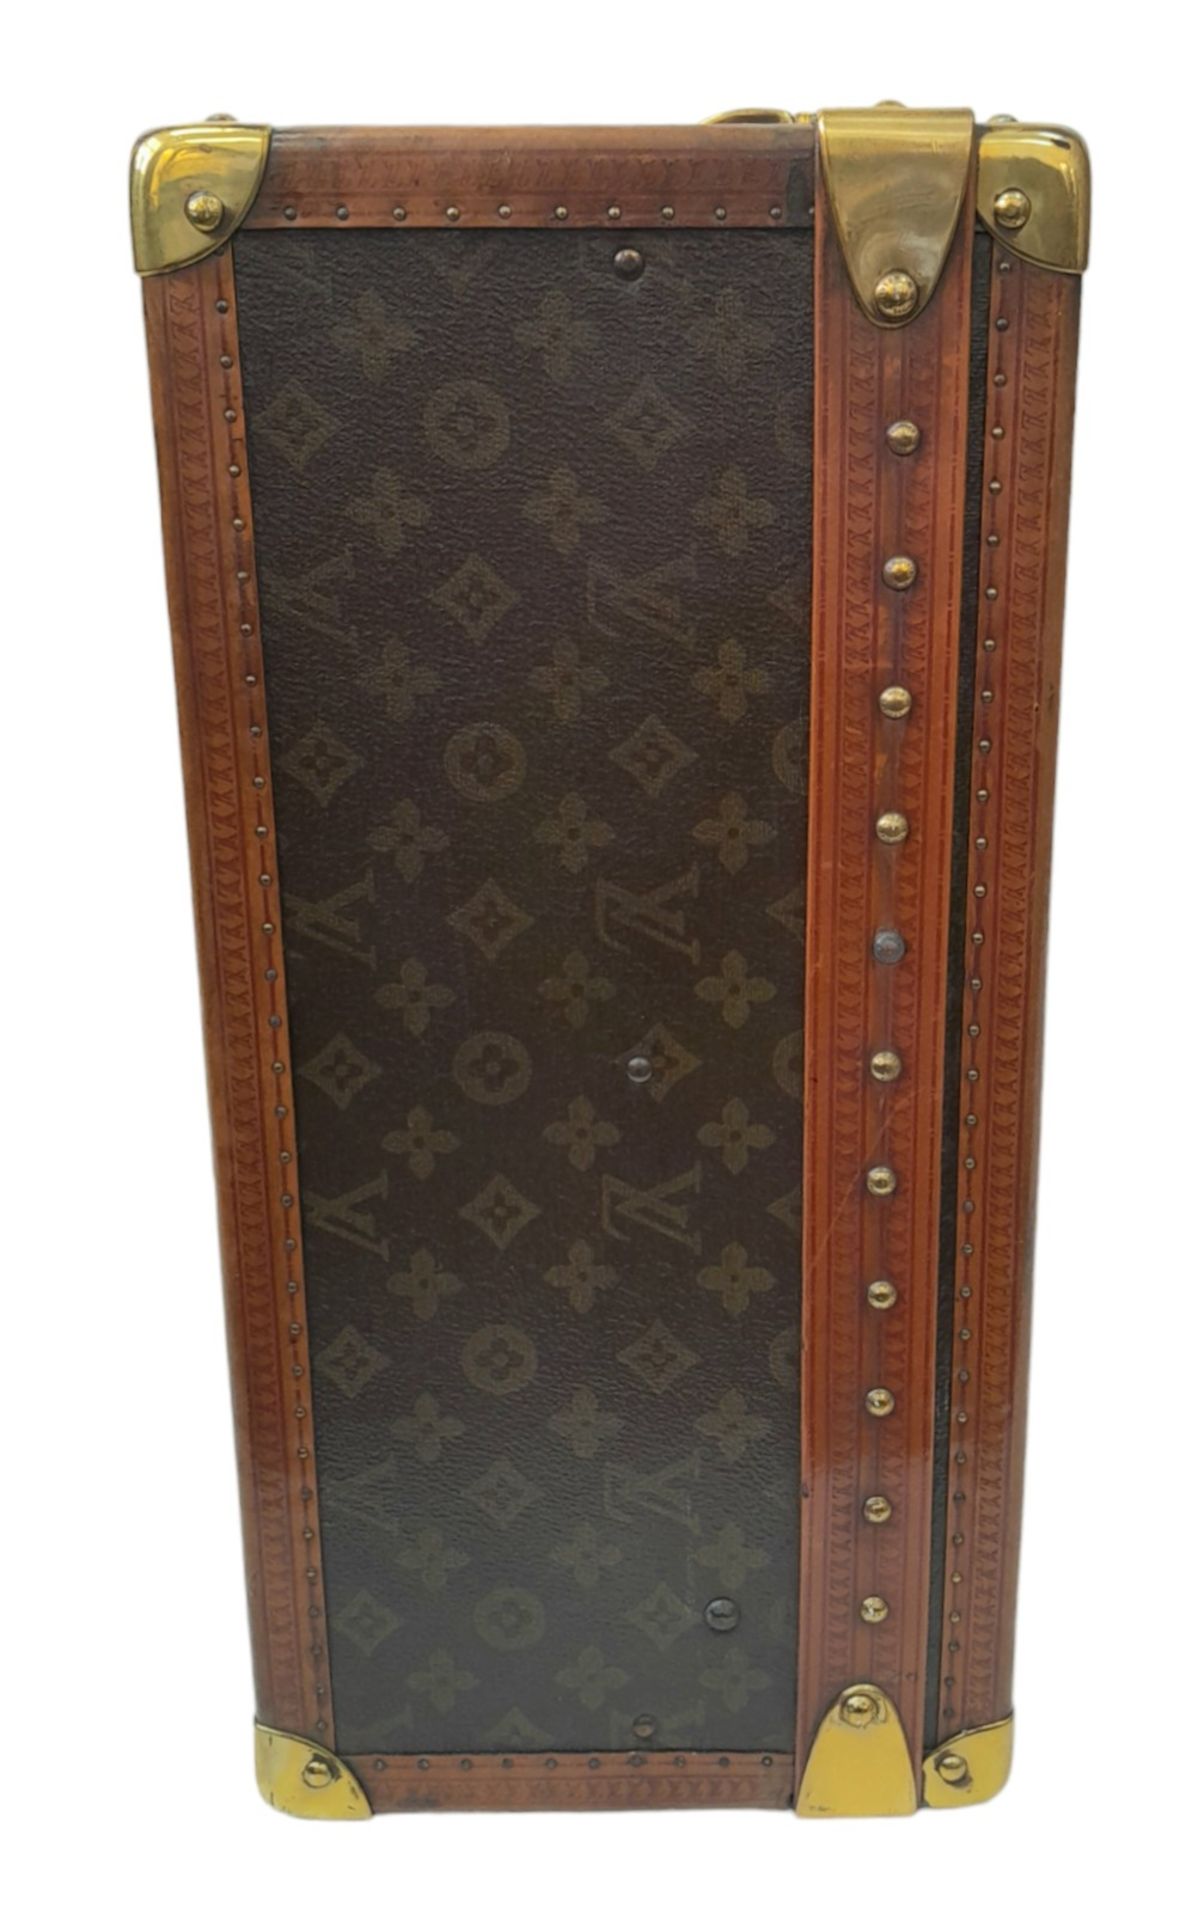 A Vintage Possibly Antique Louis Vuitton Trunk/Hard Suitcase. Canvas monogram LV exterior with - Image 10 of 15